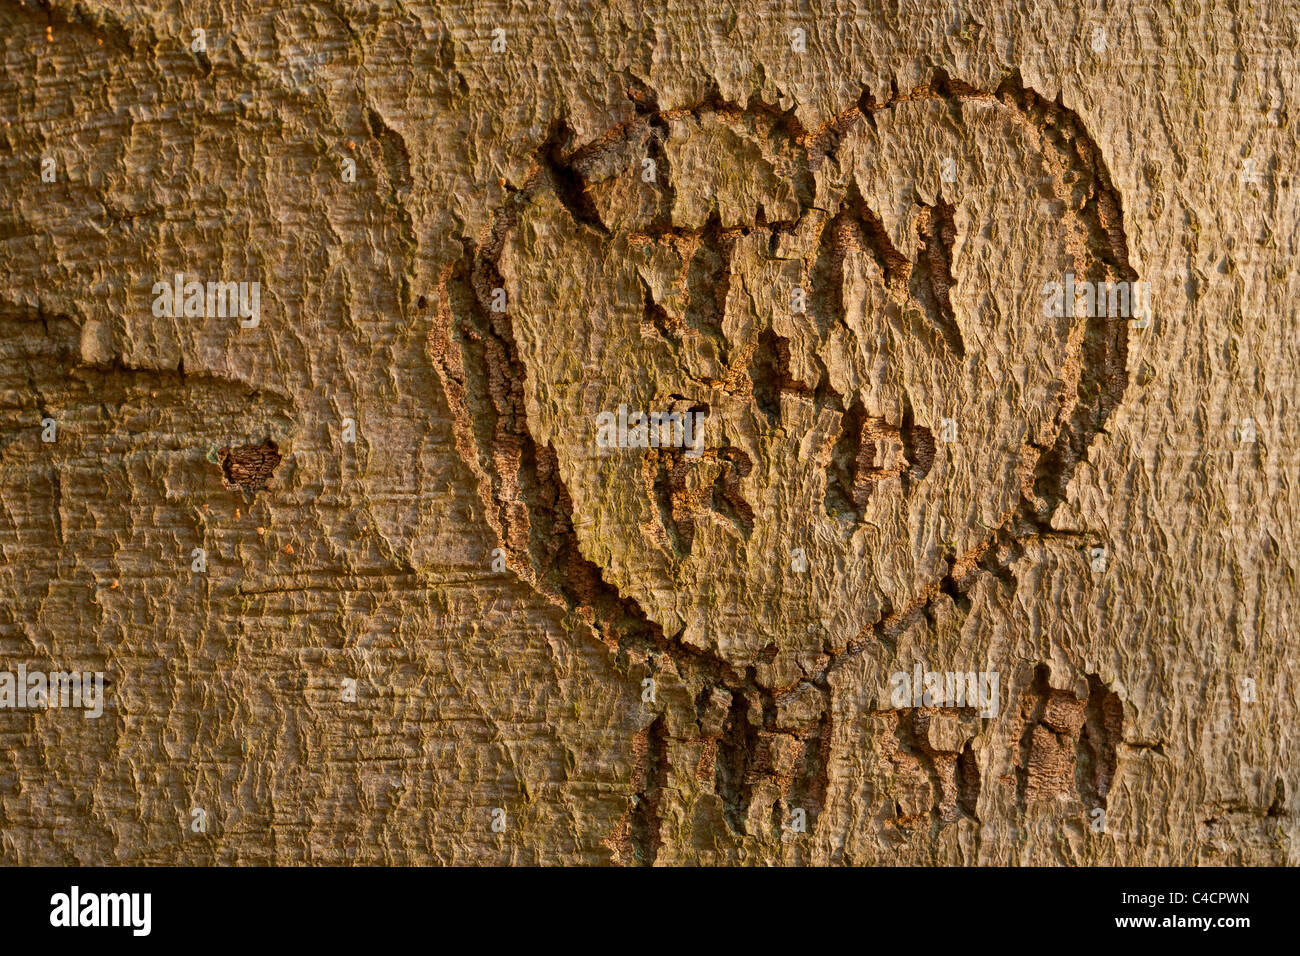 Love heart and initials carved into the bark of a beech tree Stock Photo